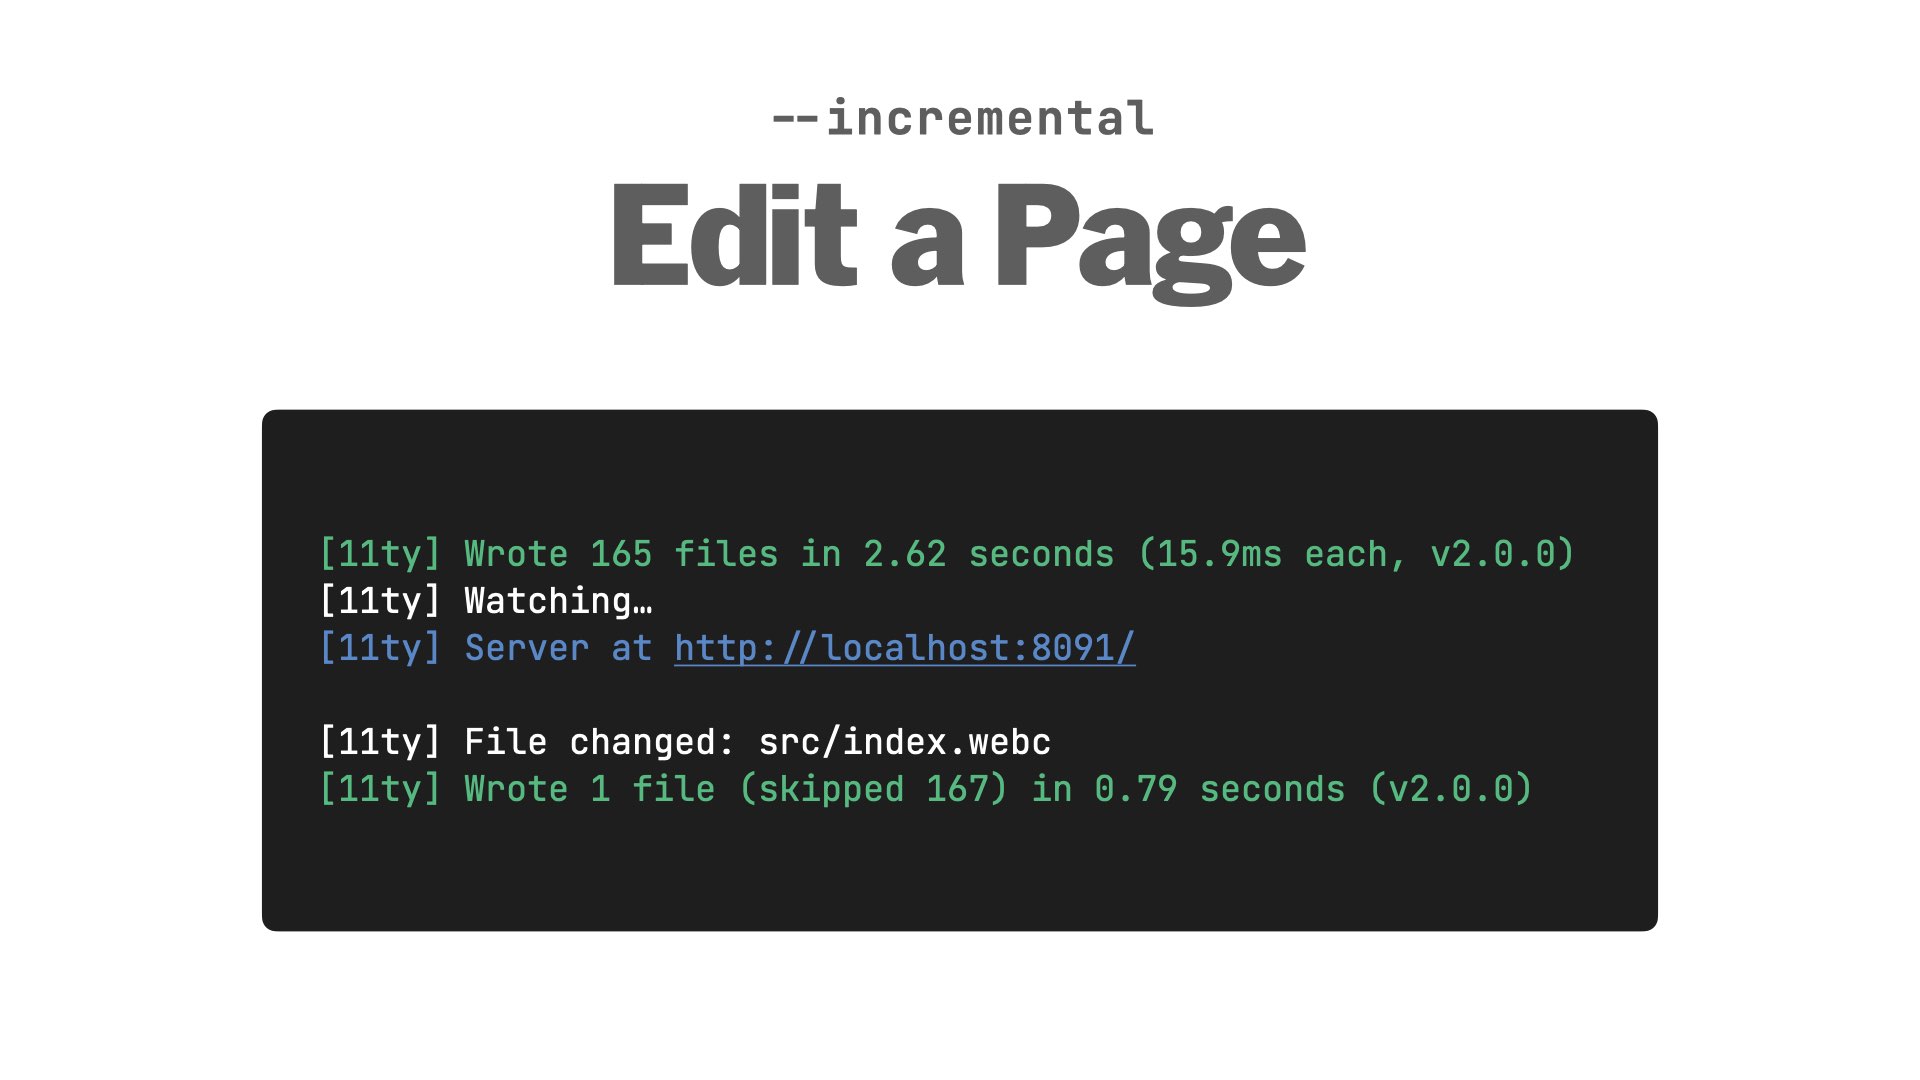 Terminal showing an incremental build, file changed: src/index.webc, Wrote 1 file (skipped 167) in 0.79 seconds